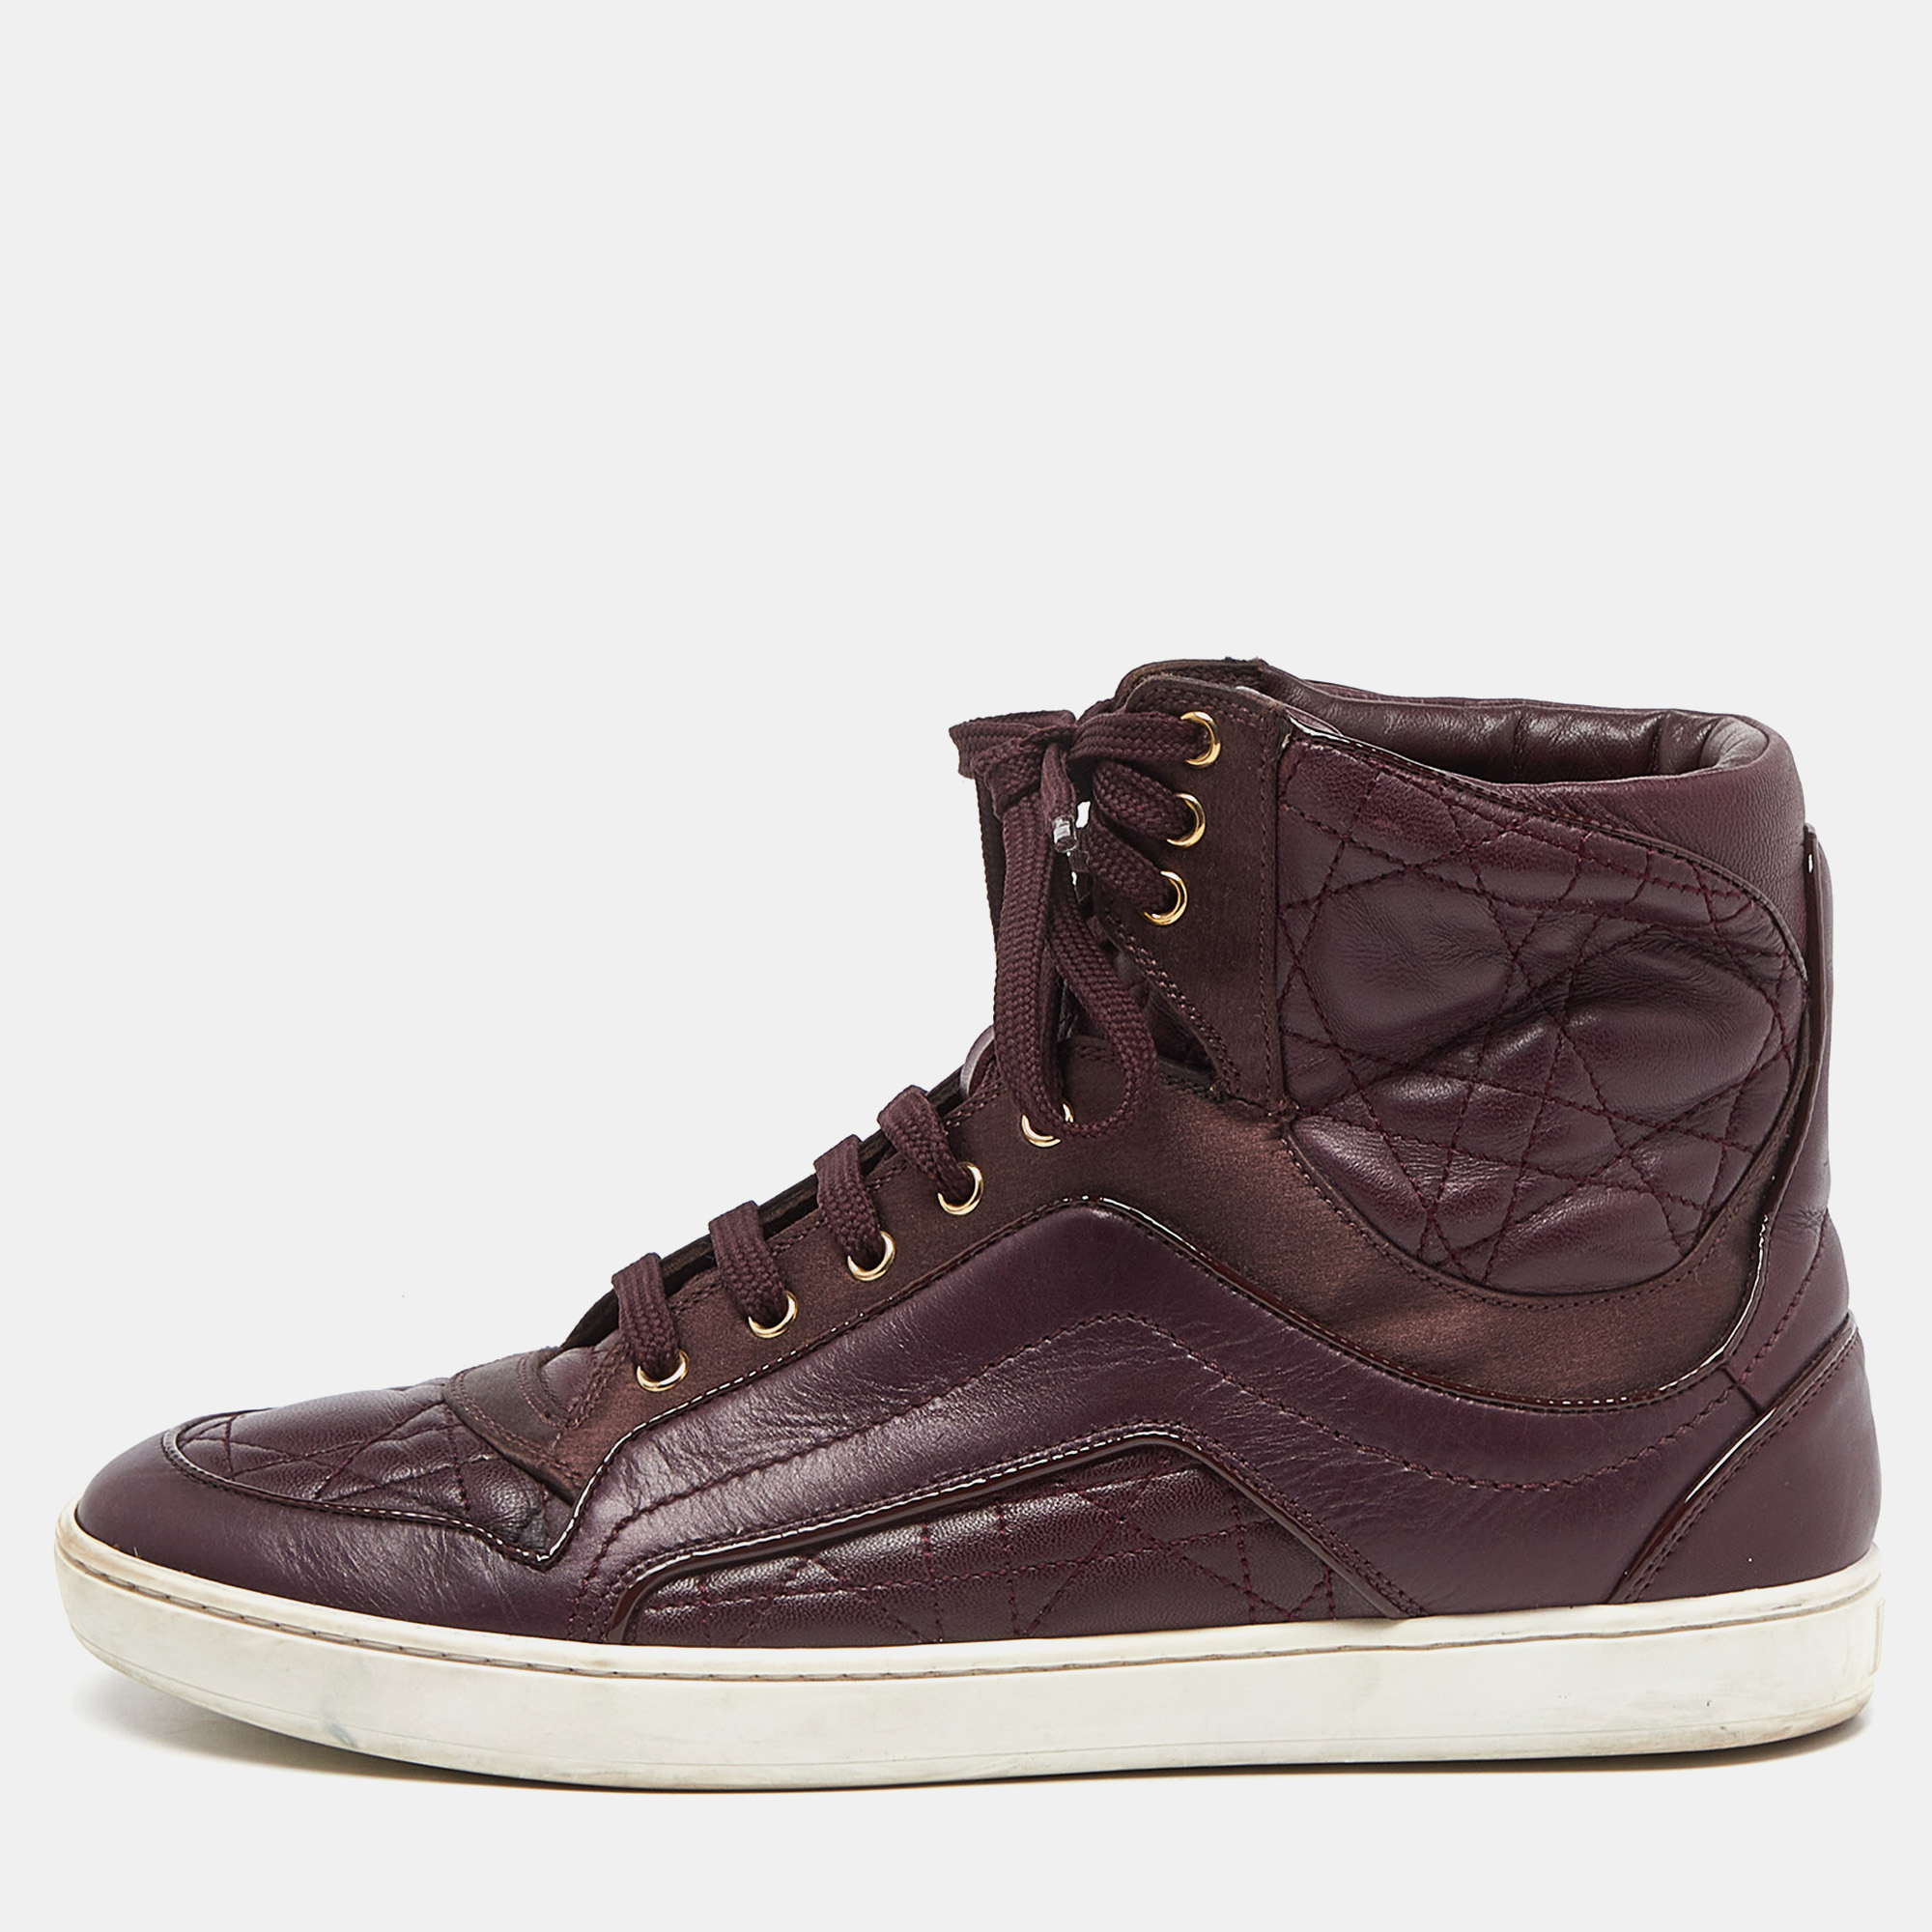 Dior burgundy quilted leather and satin high top sneakers size 36